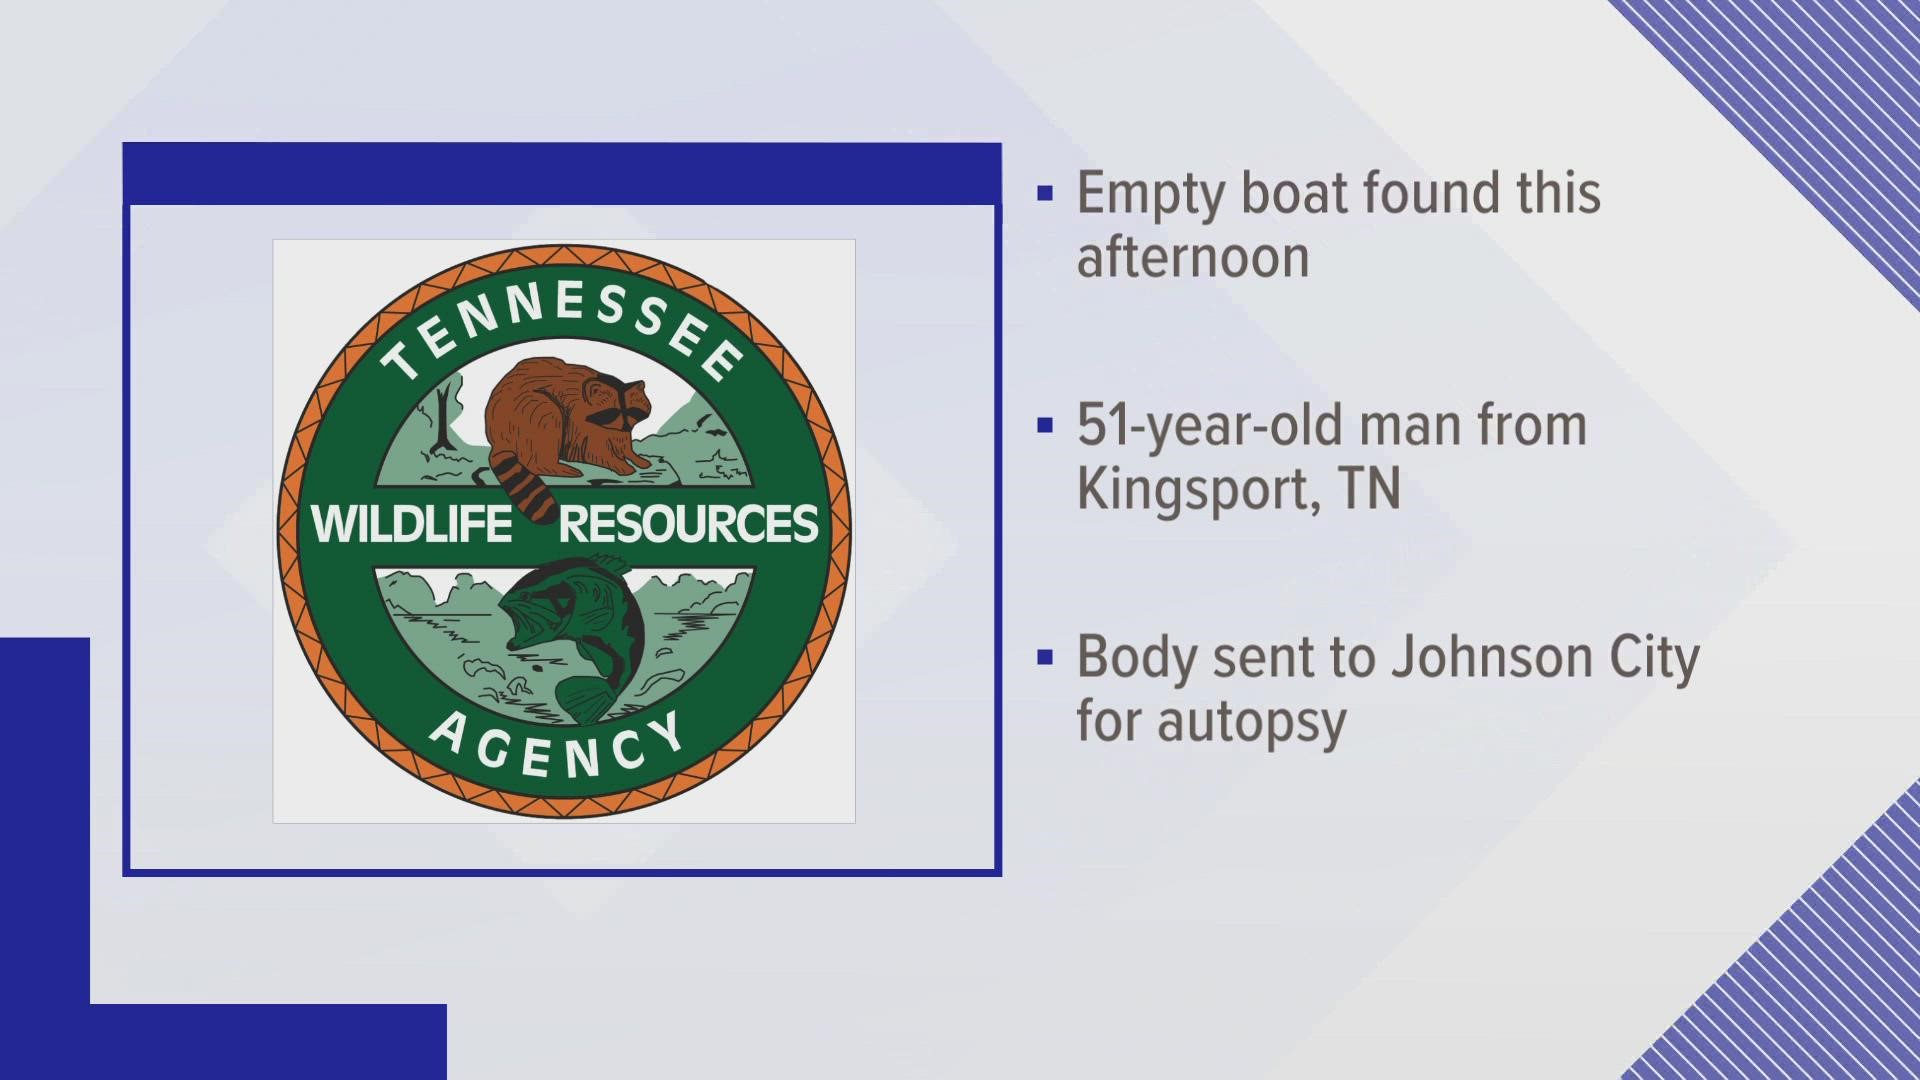 The Tennessee Wildlife Resources Agency said a 51-year-old man was found dead in the water of Holston River Wednesday evening, around 200 yards from his boat.